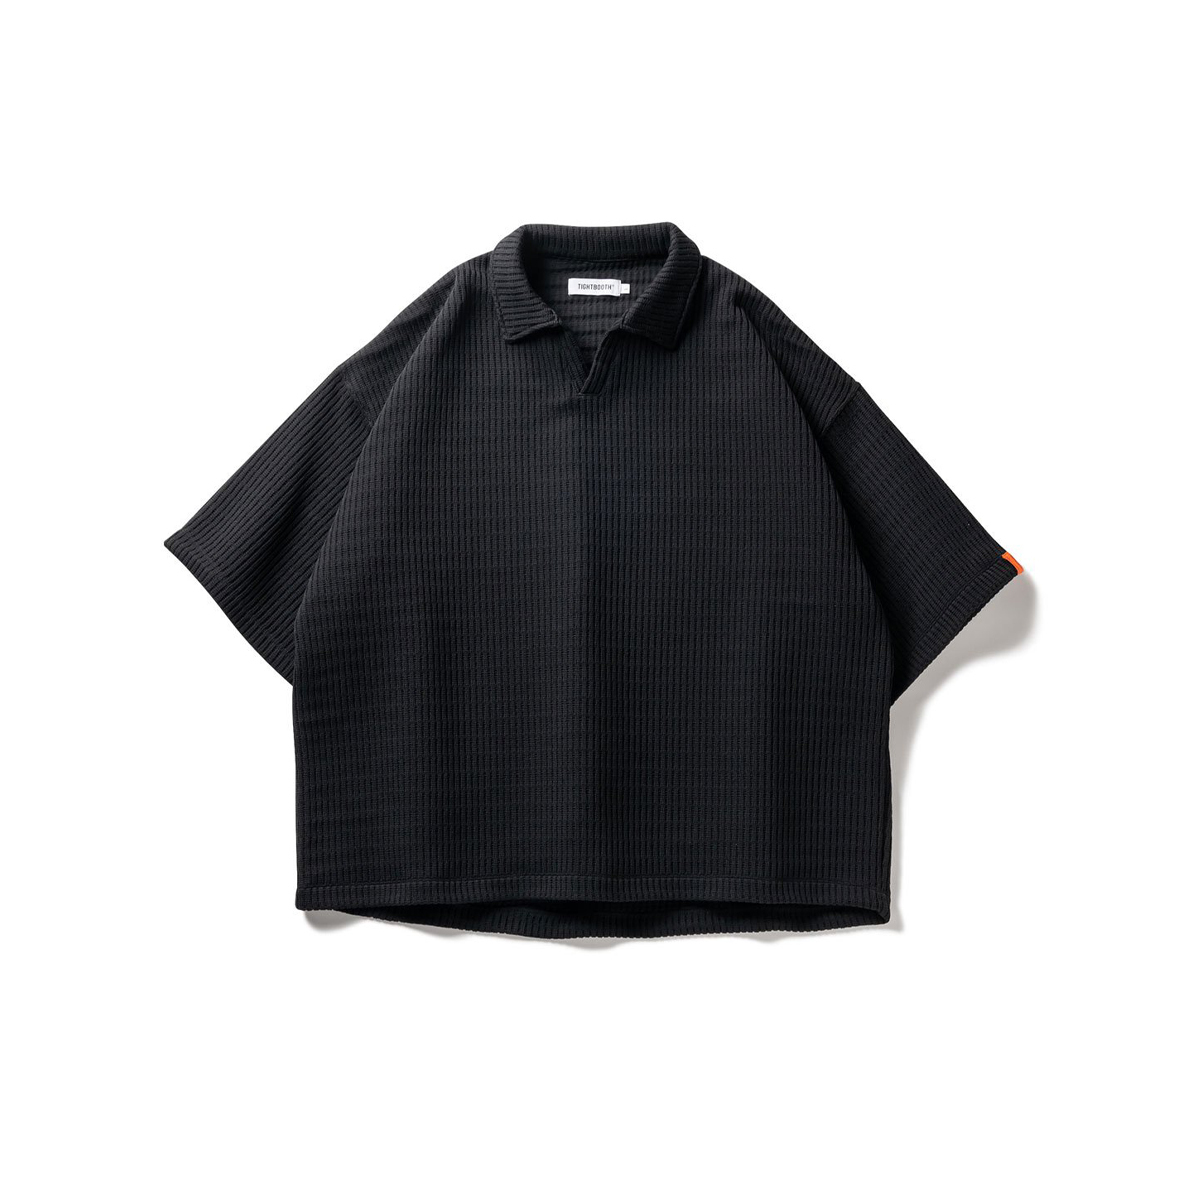 TIGHTBOOTH - Mystery Gauge Open Polo Shirt - Black